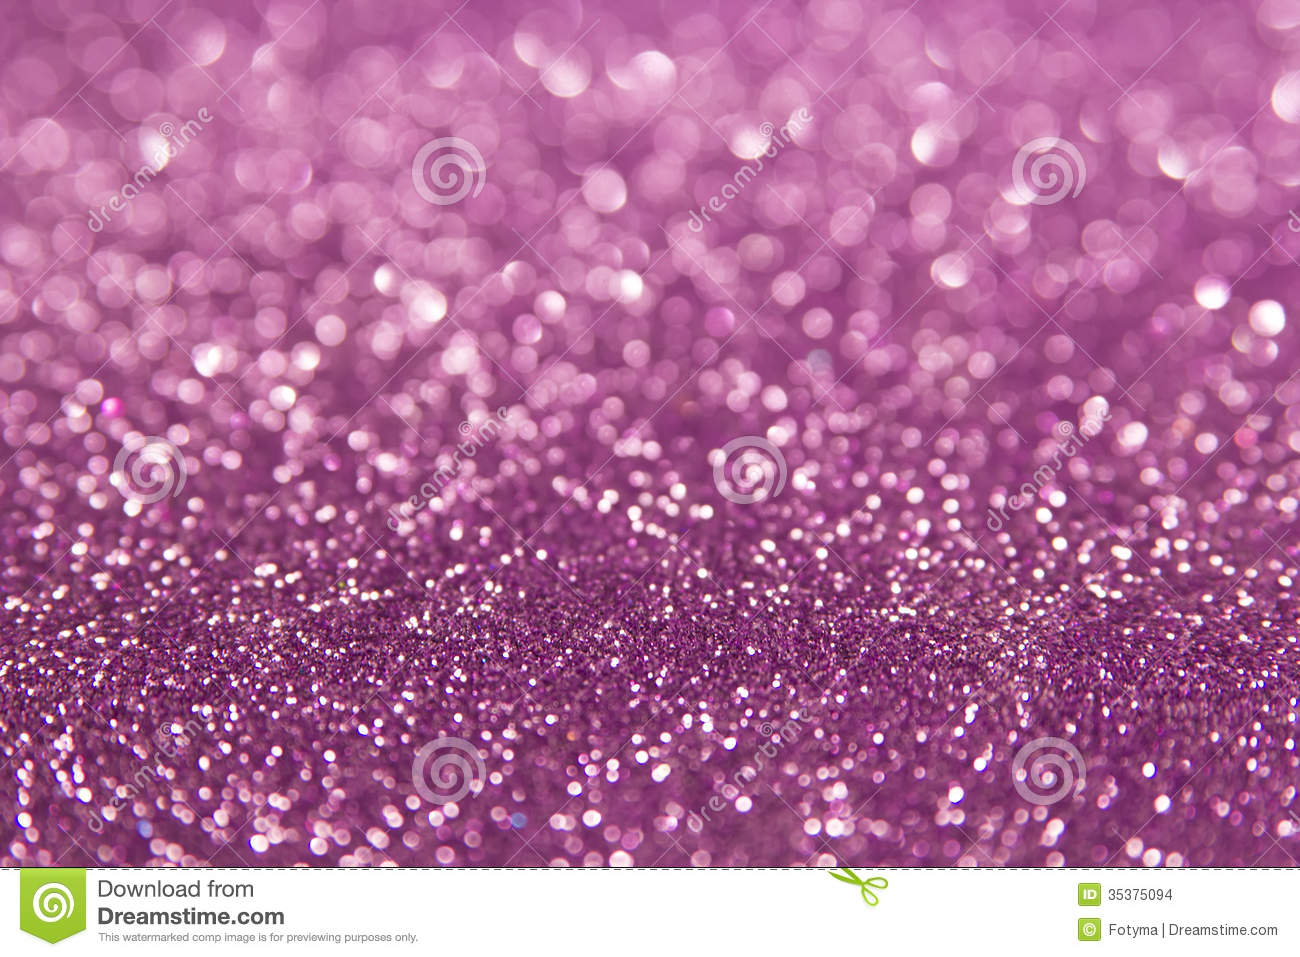 Purple Glitter Wallpaper   HD Wallpapers and Pictures